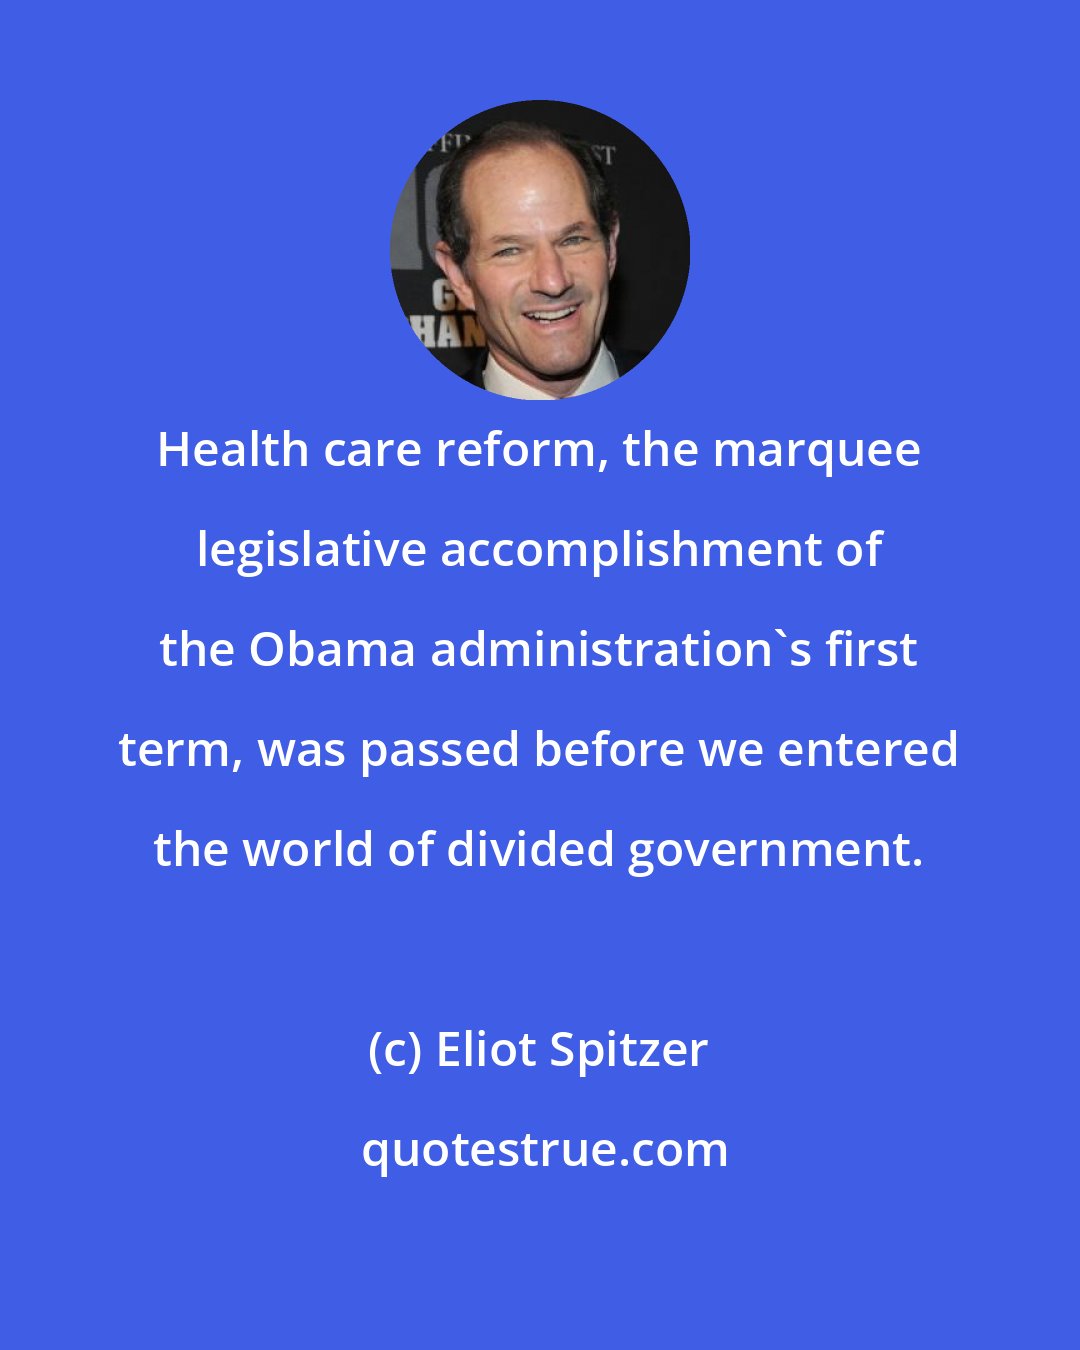 Eliot Spitzer: Health care reform, the marquee legislative accomplishment of the Obama administration's first term, was passed before we entered the world of divided government.